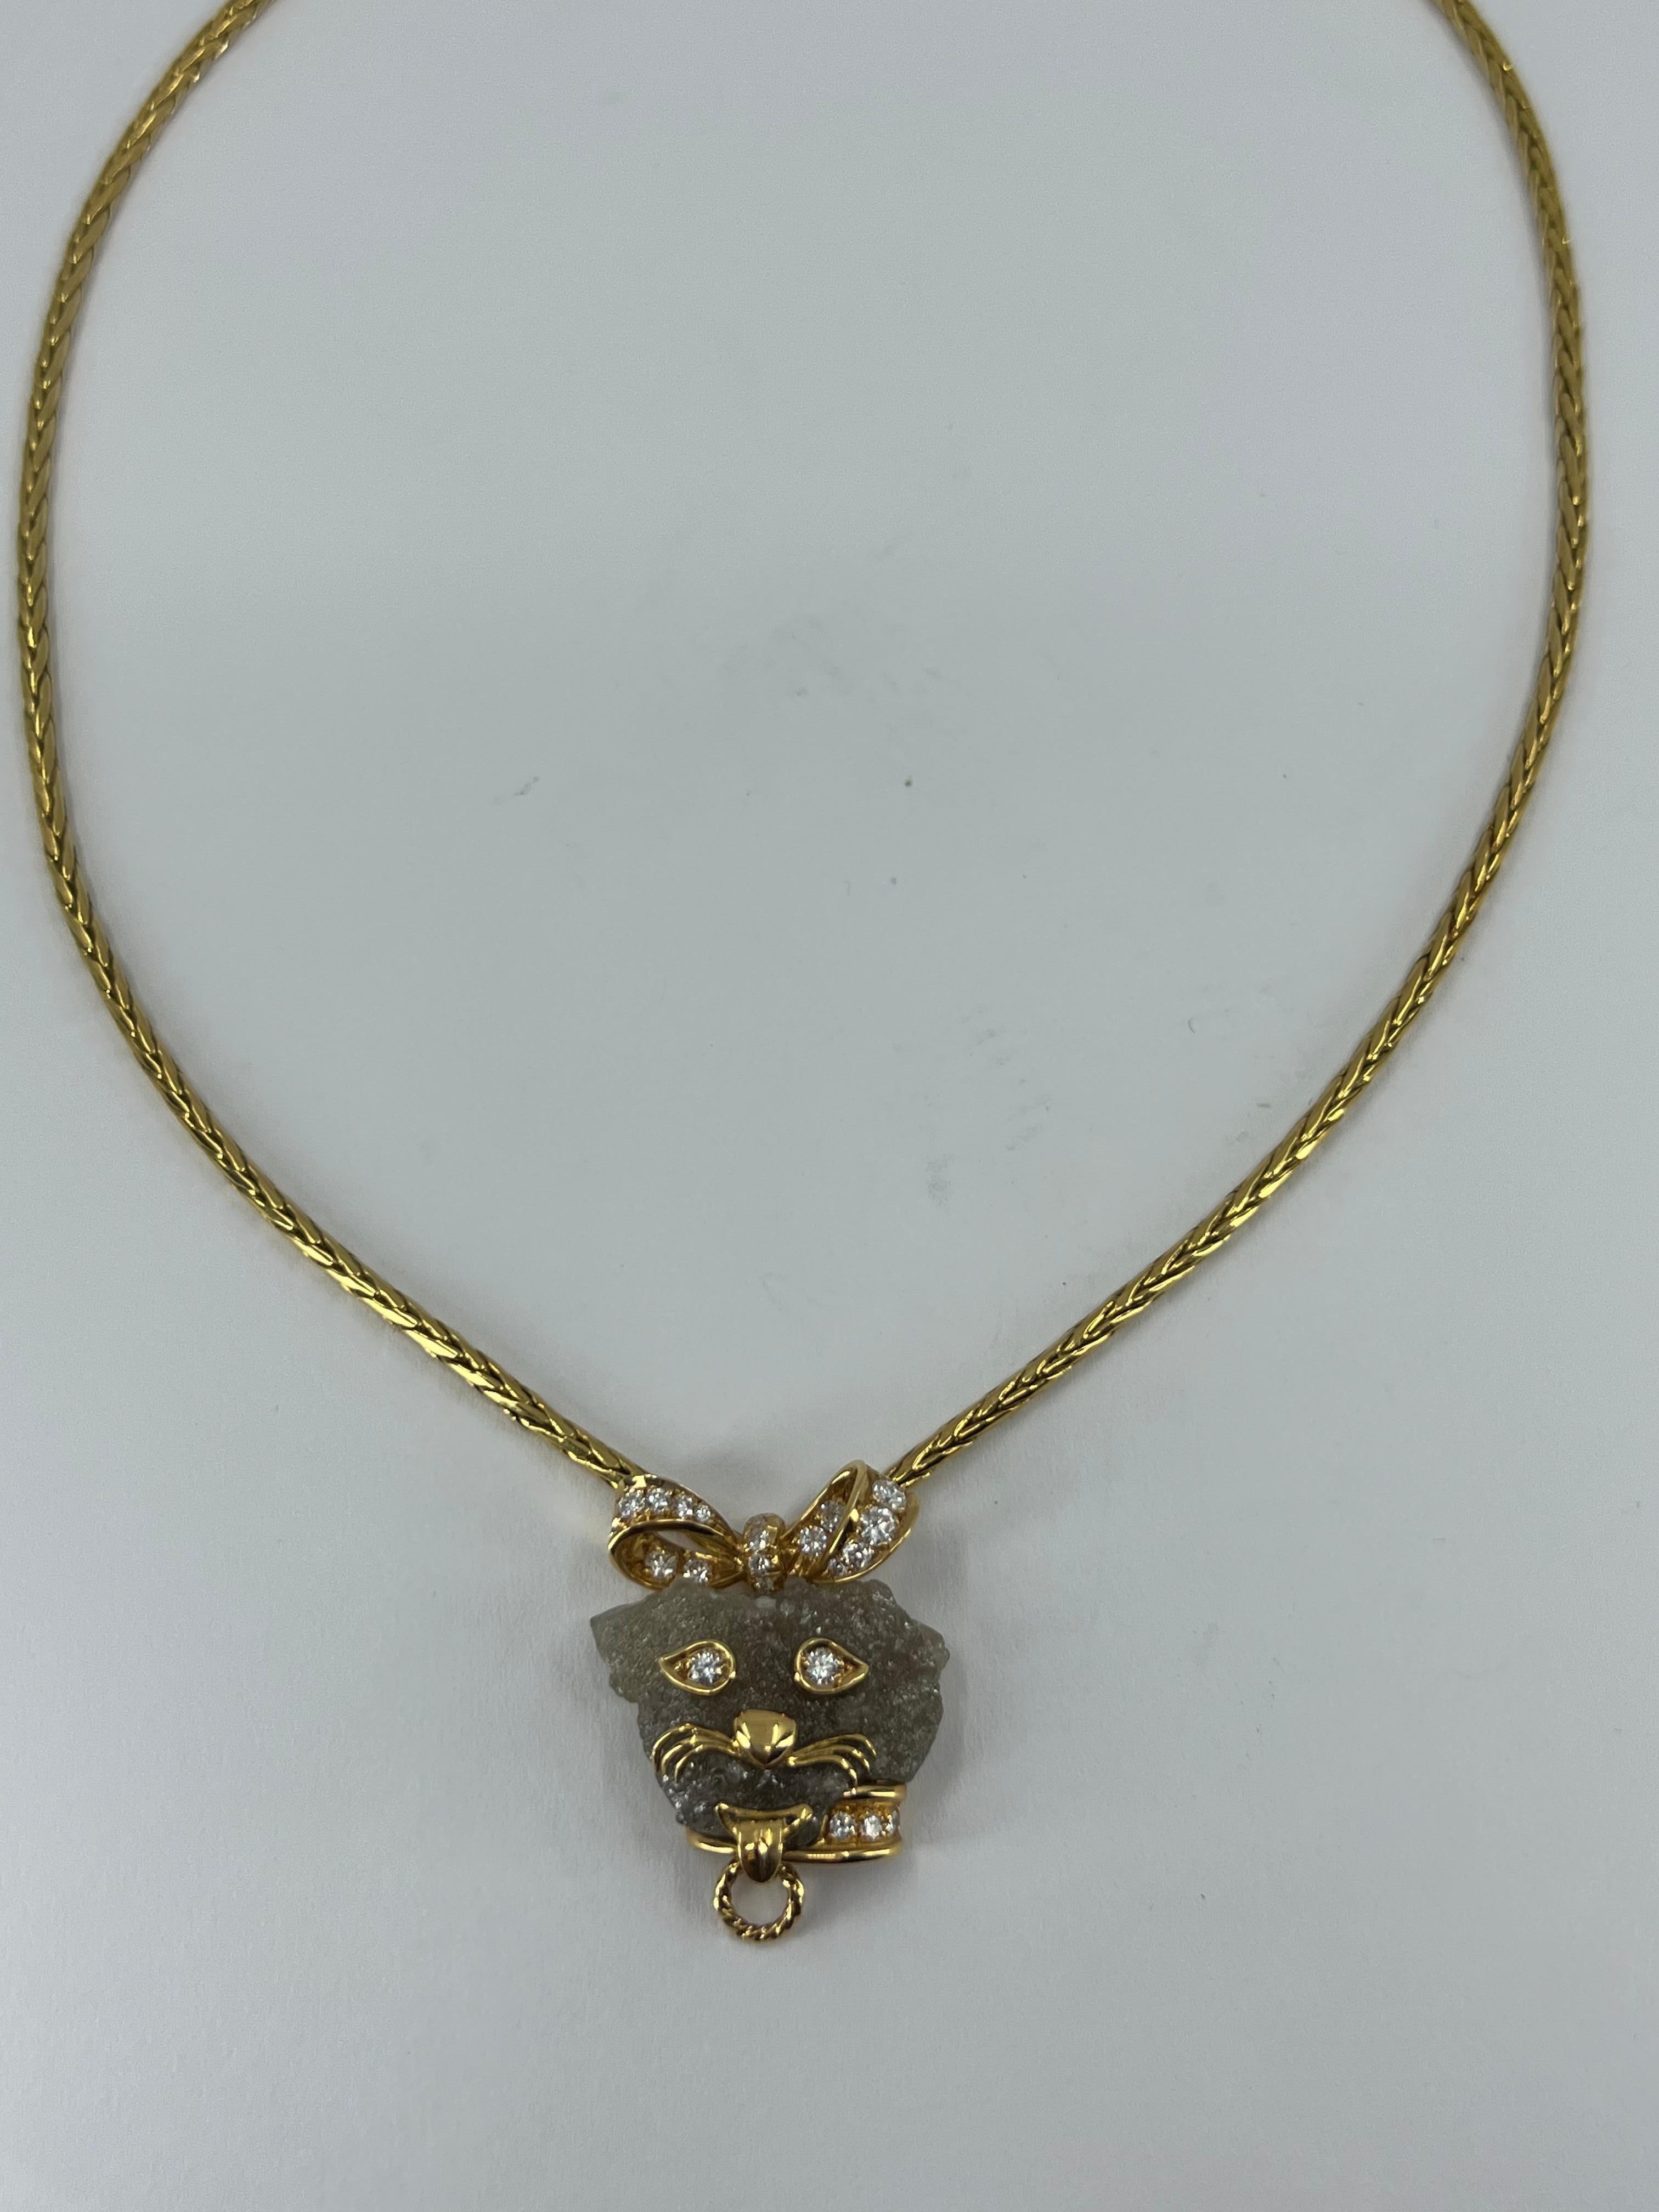 A cute and fun French 18k gold necklace with a dog’s head pendant.

This unique piece carries multiple tiny details that are interesting to explore. The necklace consists of the gold foxtail chain and the diamond pendant designed as a stylized dog’s